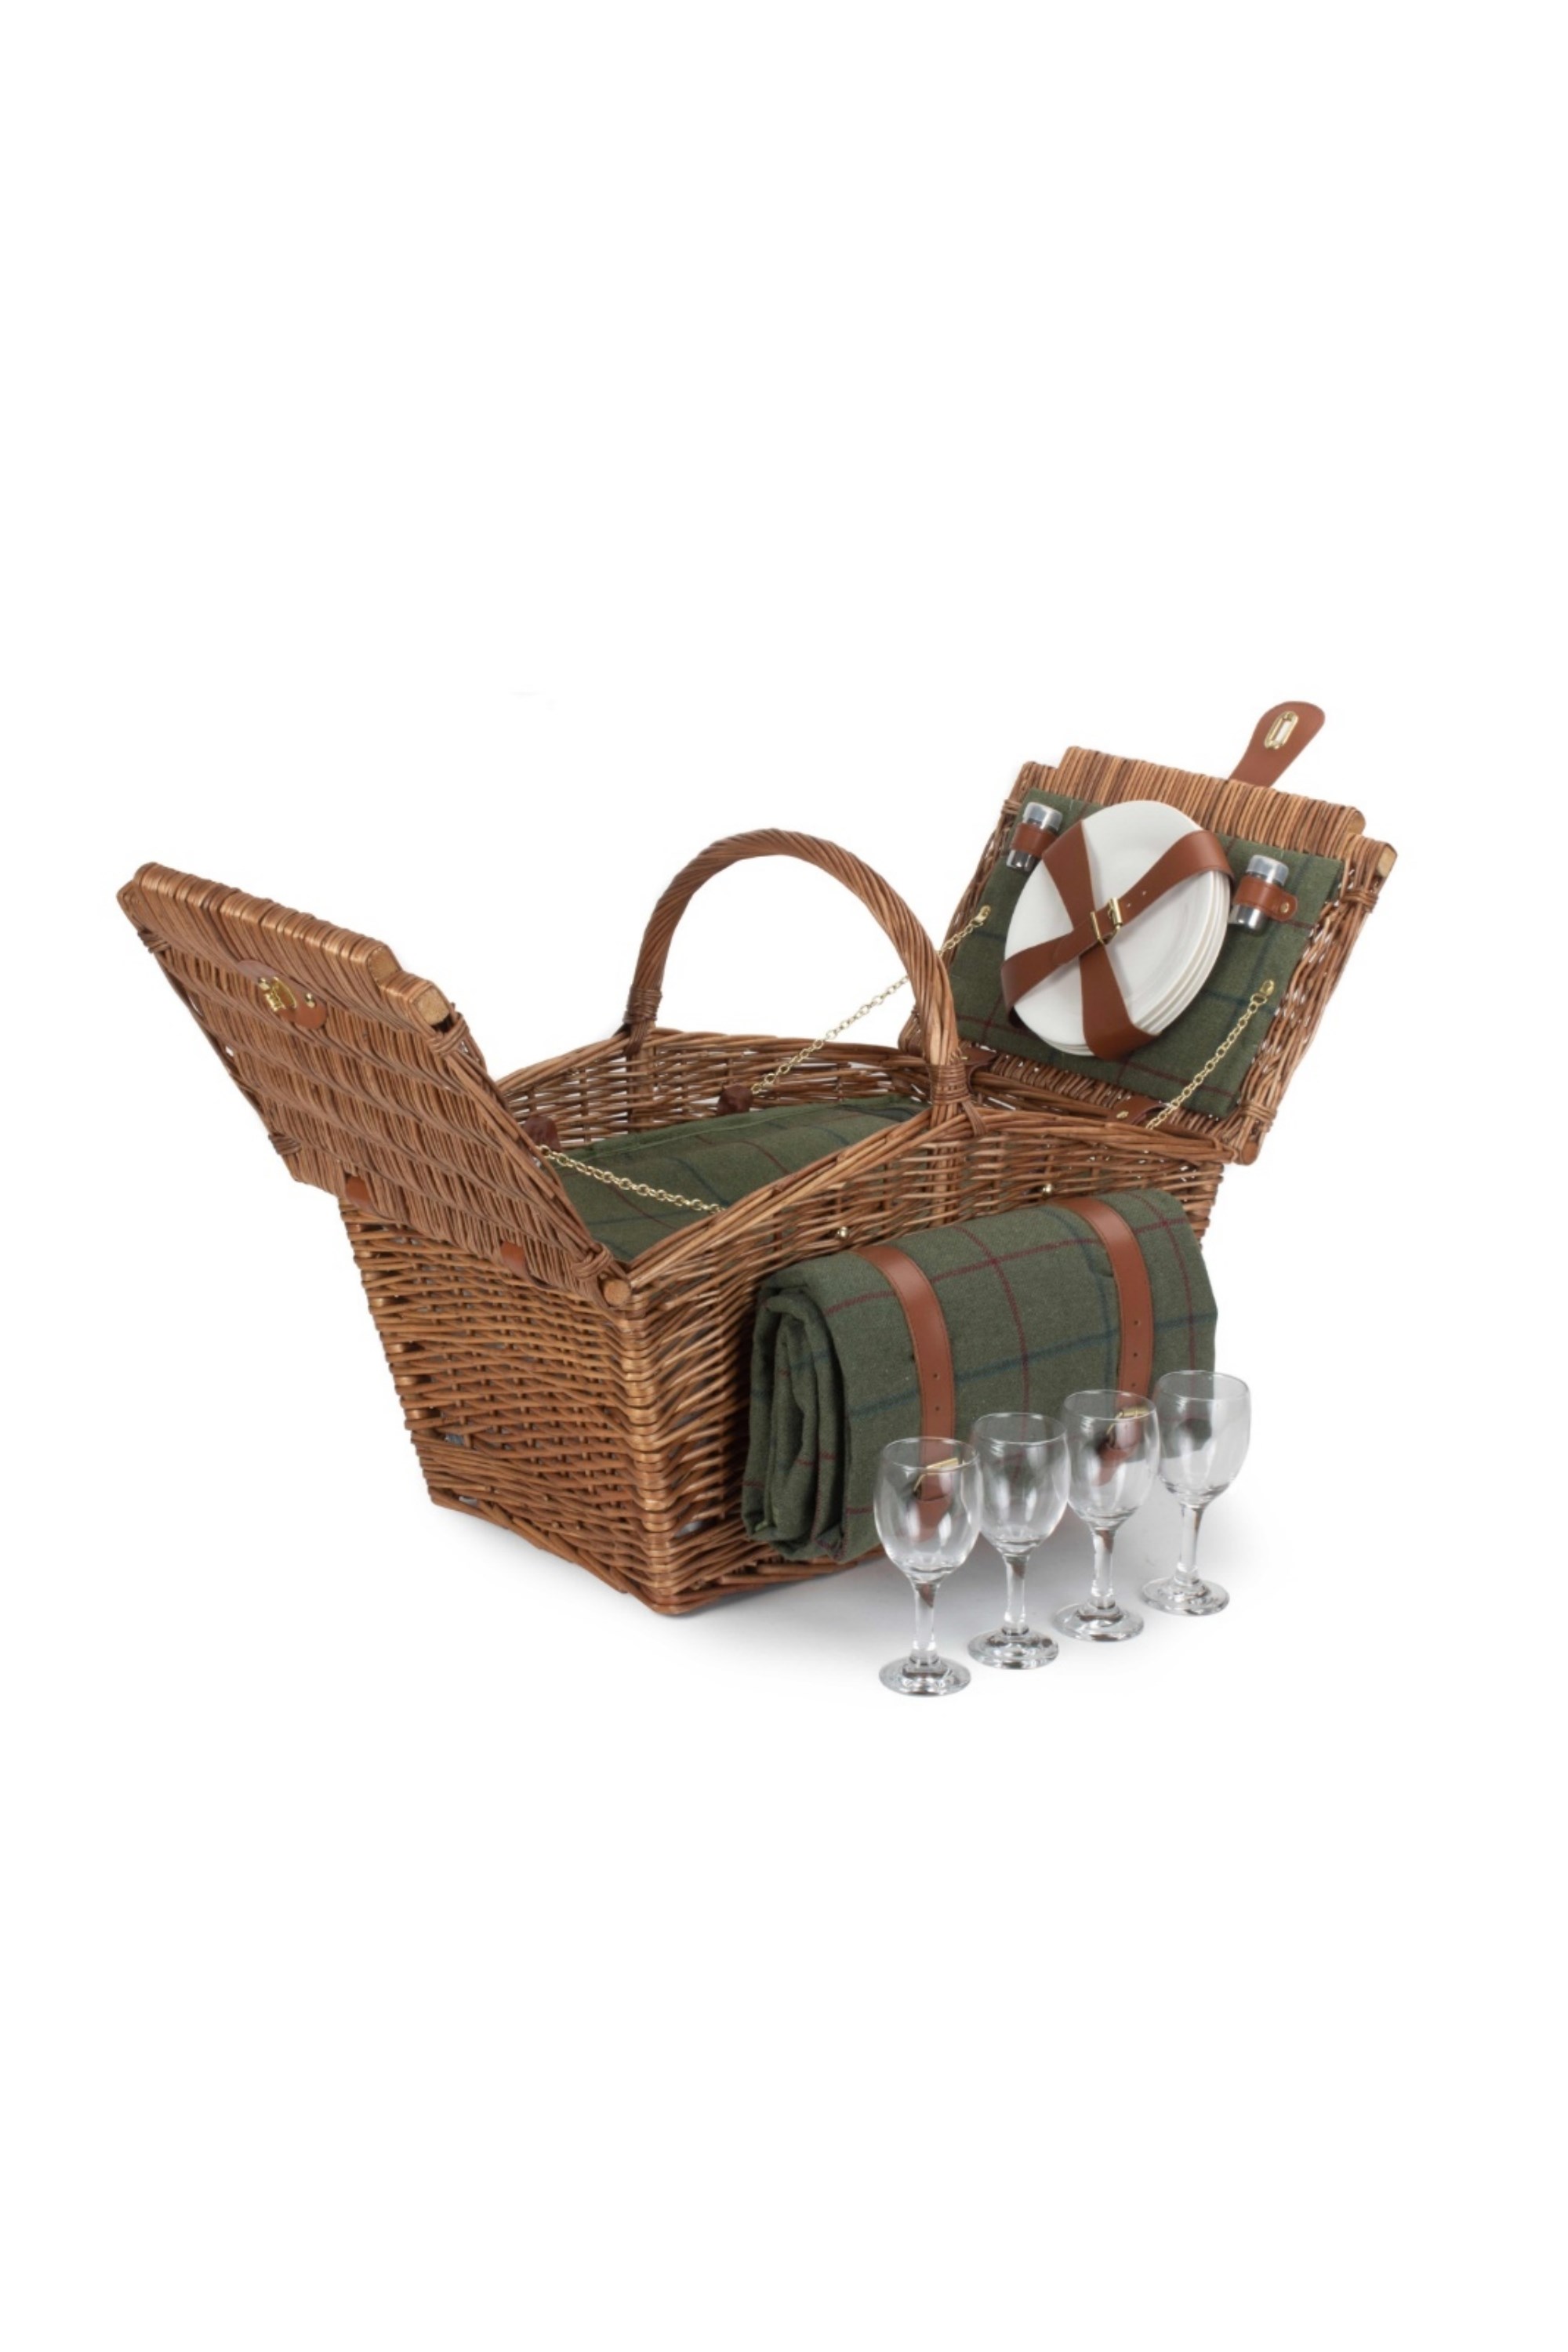 Elegant 4 Person Green Tweed Fitted Picnic Basket -